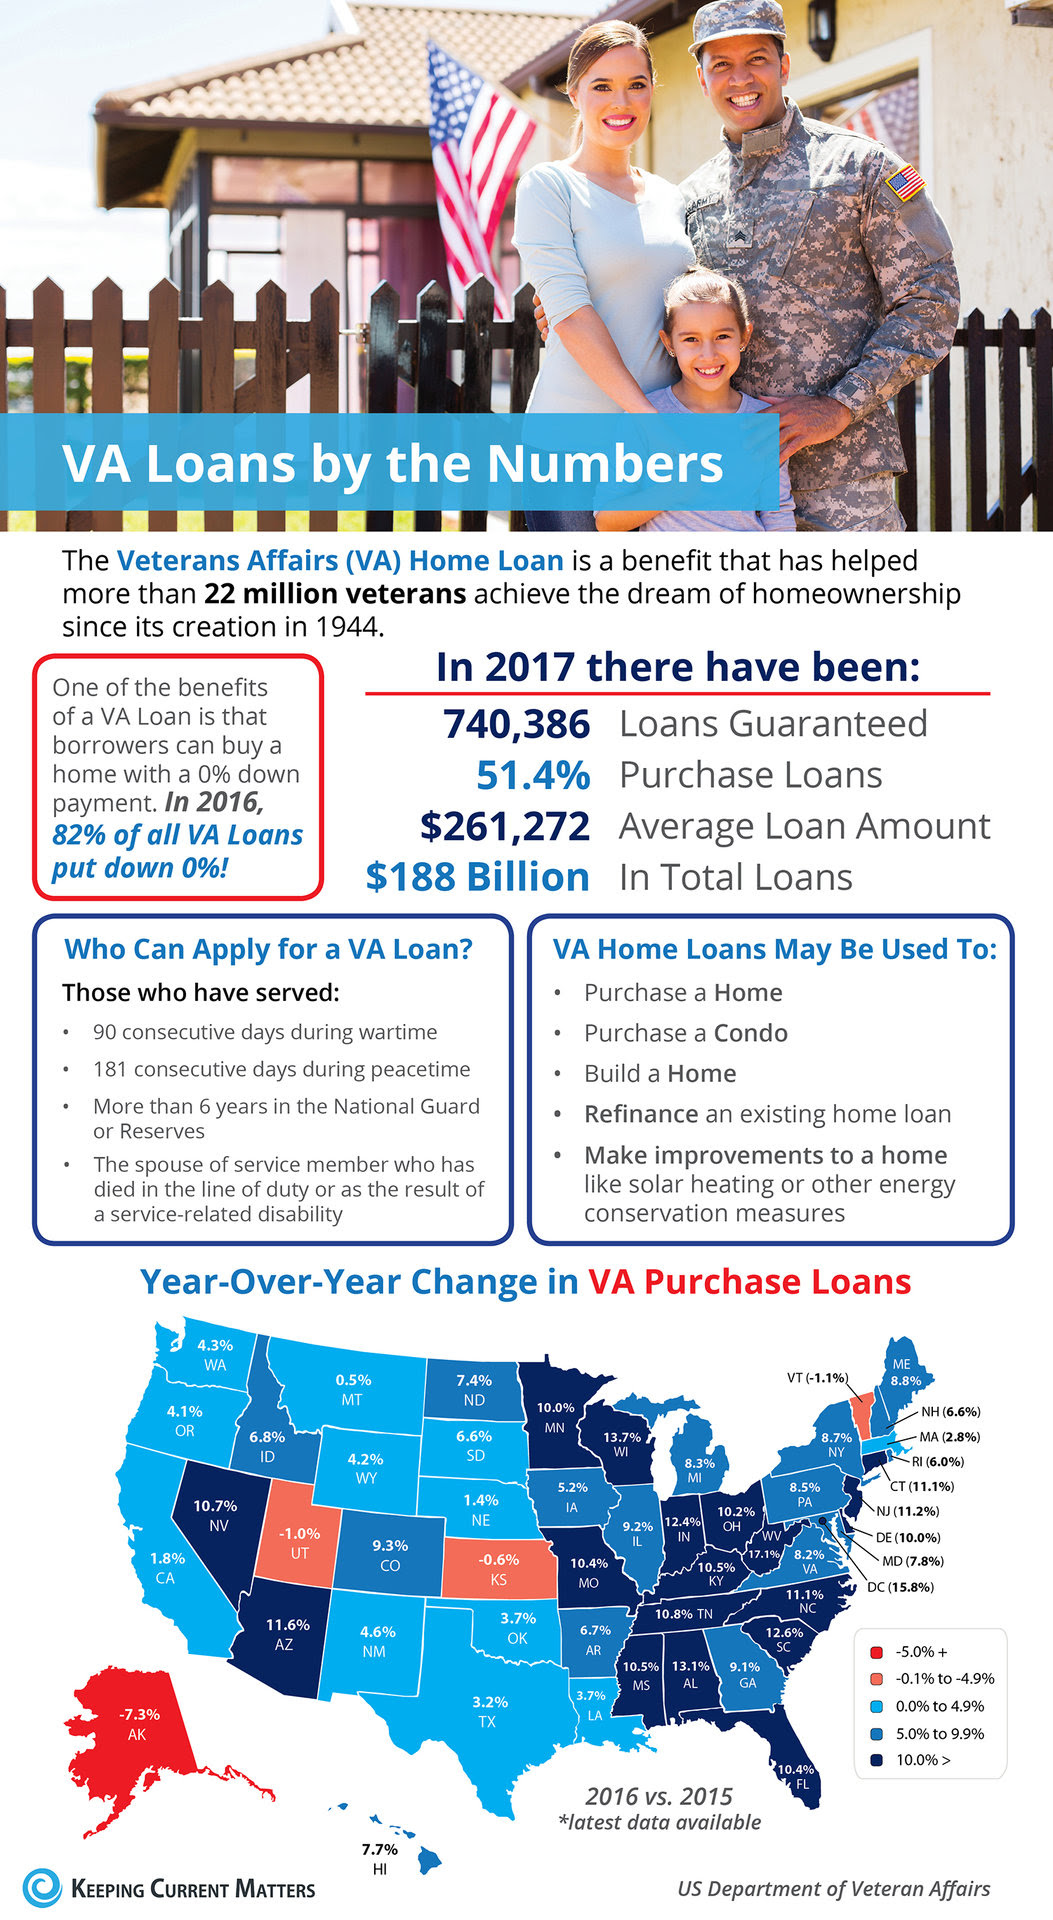 Veterans Affairs Loans by the Numbers [INFOGRAPHIC] | Keeping Current Matters